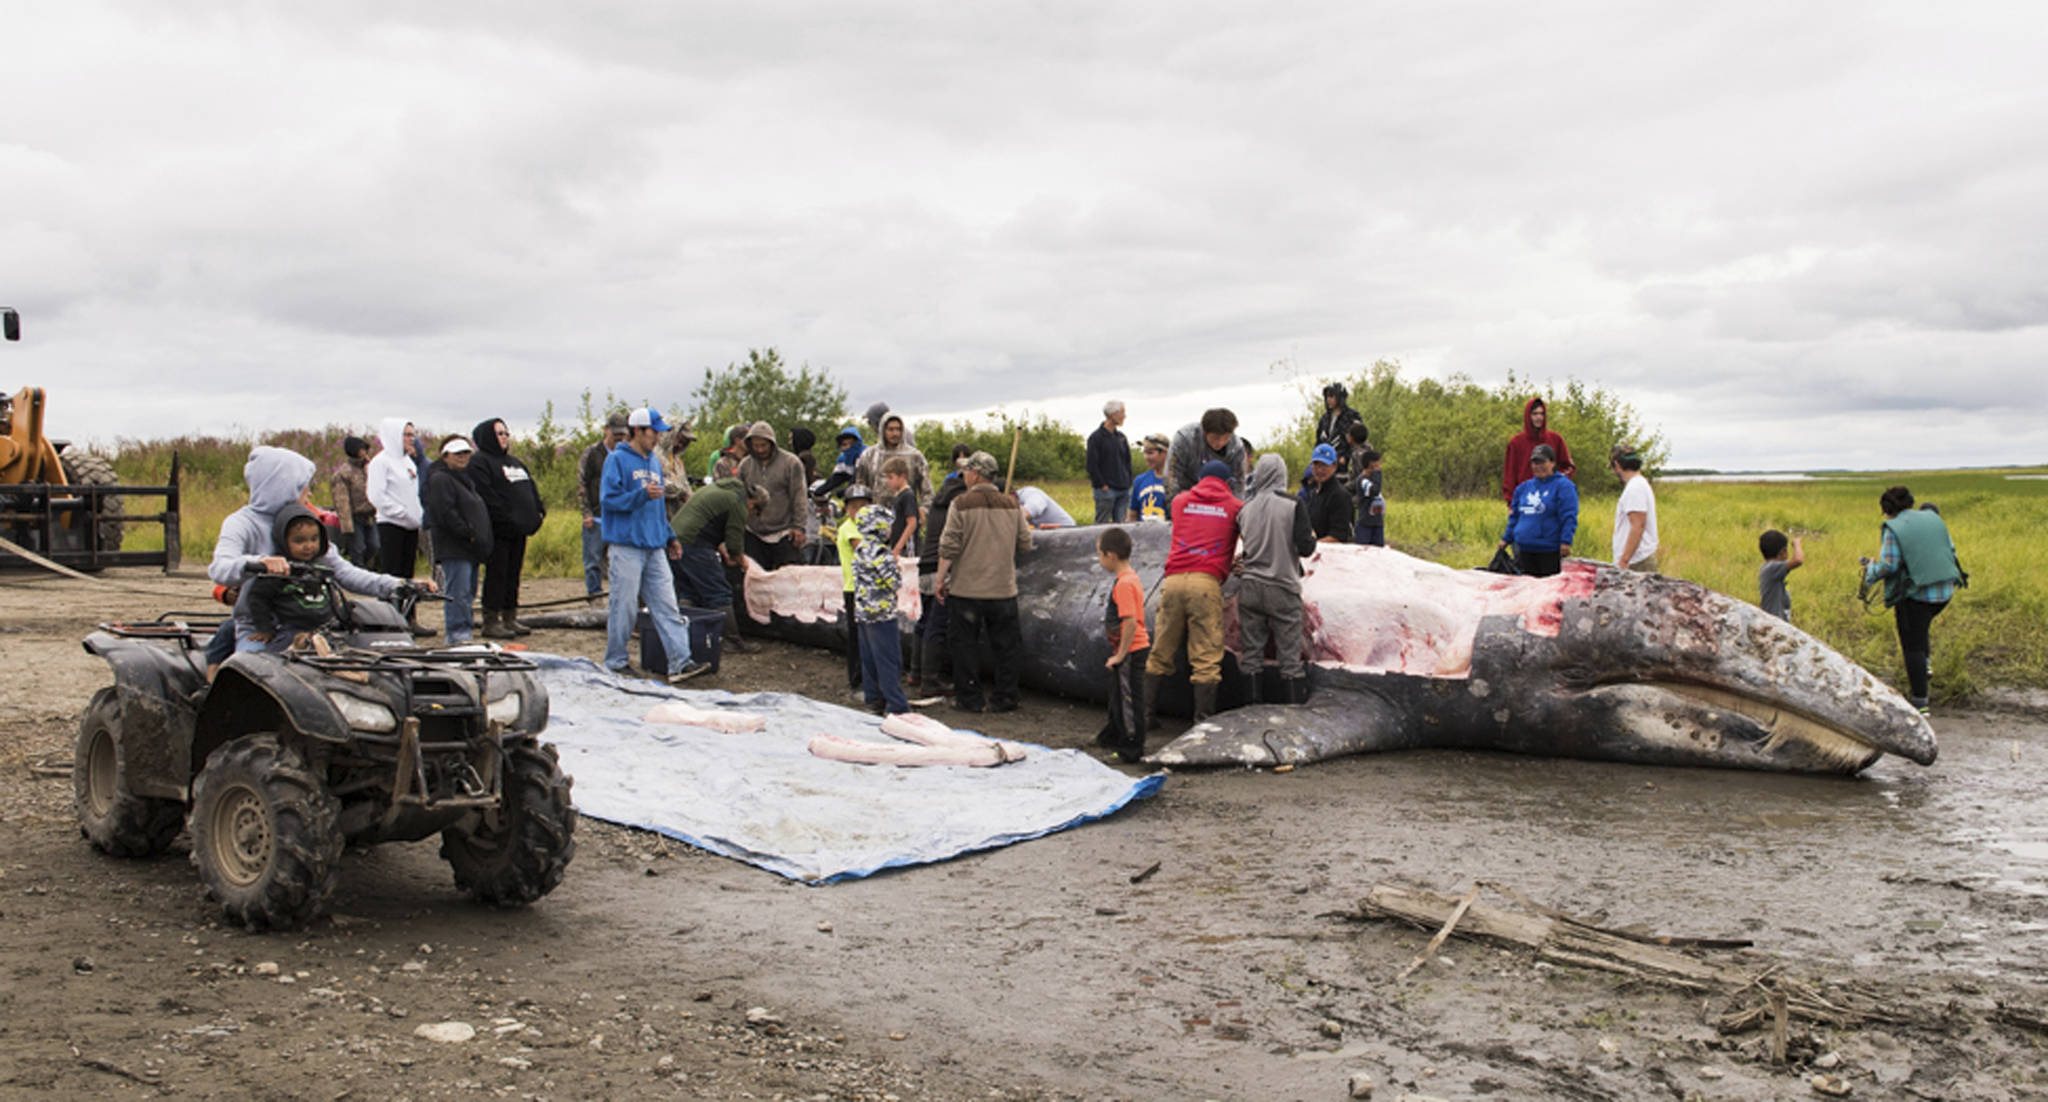 In this Saturday photo provided by KYUK Public Media, a gray whale killed in the Kuskokwim River is butchered and the meat and blubber distributed in Napaskiak, Alaska. Local residents in boats chased the massive animal, peppering it with gunfire and harpoons before it died and sunk to the bottom of the river, where it was later retrieved and cut up for distribution among Alaska Native villages. Federal officials are investigating what they say appears to be the unauthorized harvest of a gray whale. (Katie Basile/ KYUK Public Media via AP)